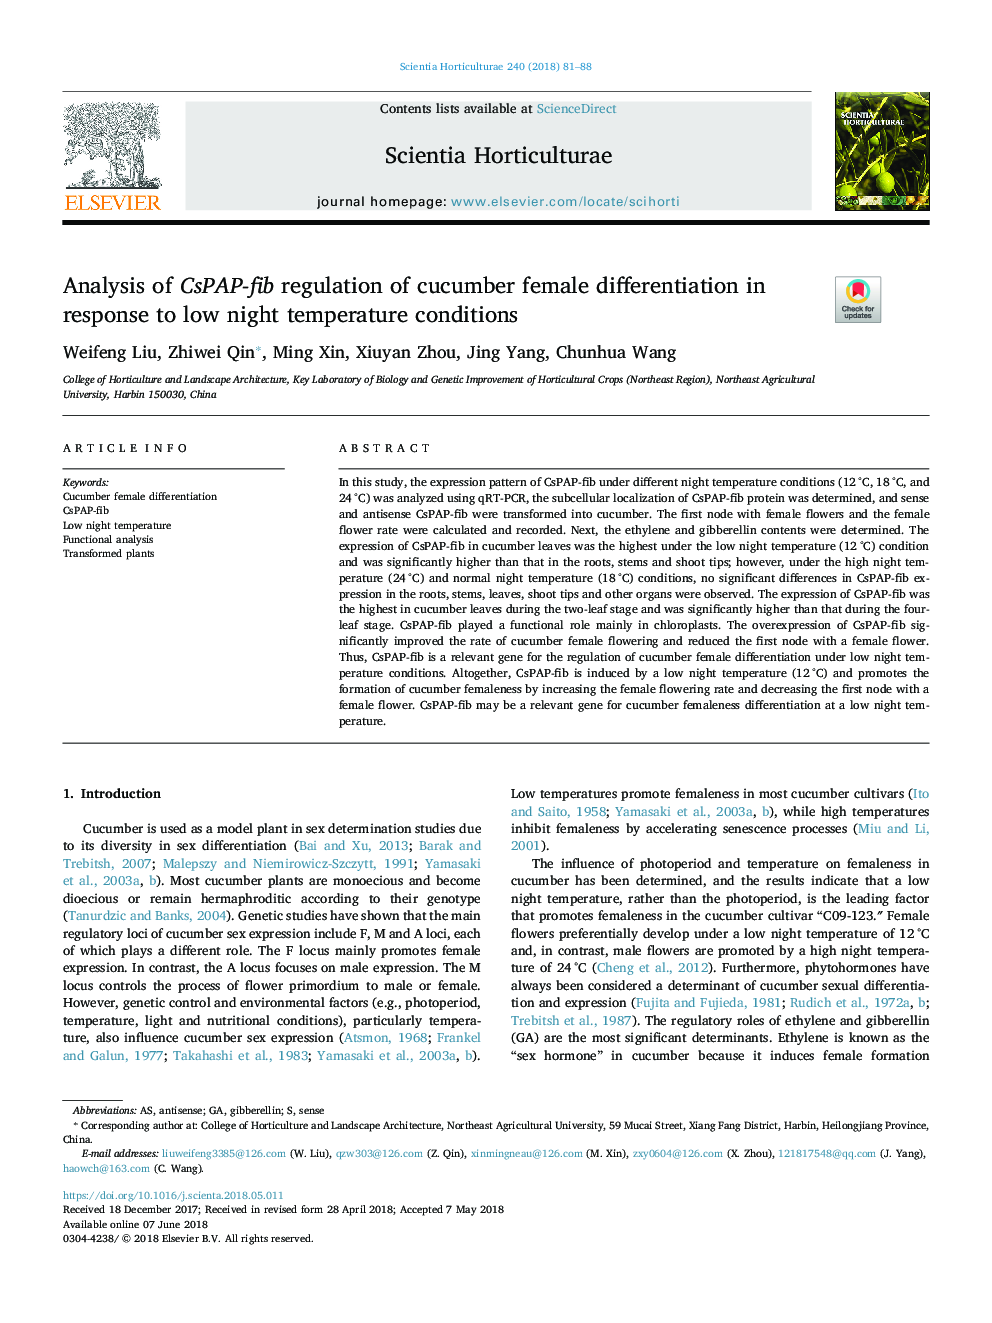 Analysis of CsPAP-fib regulation of cucumber female differentiation in response to low night temperature conditions